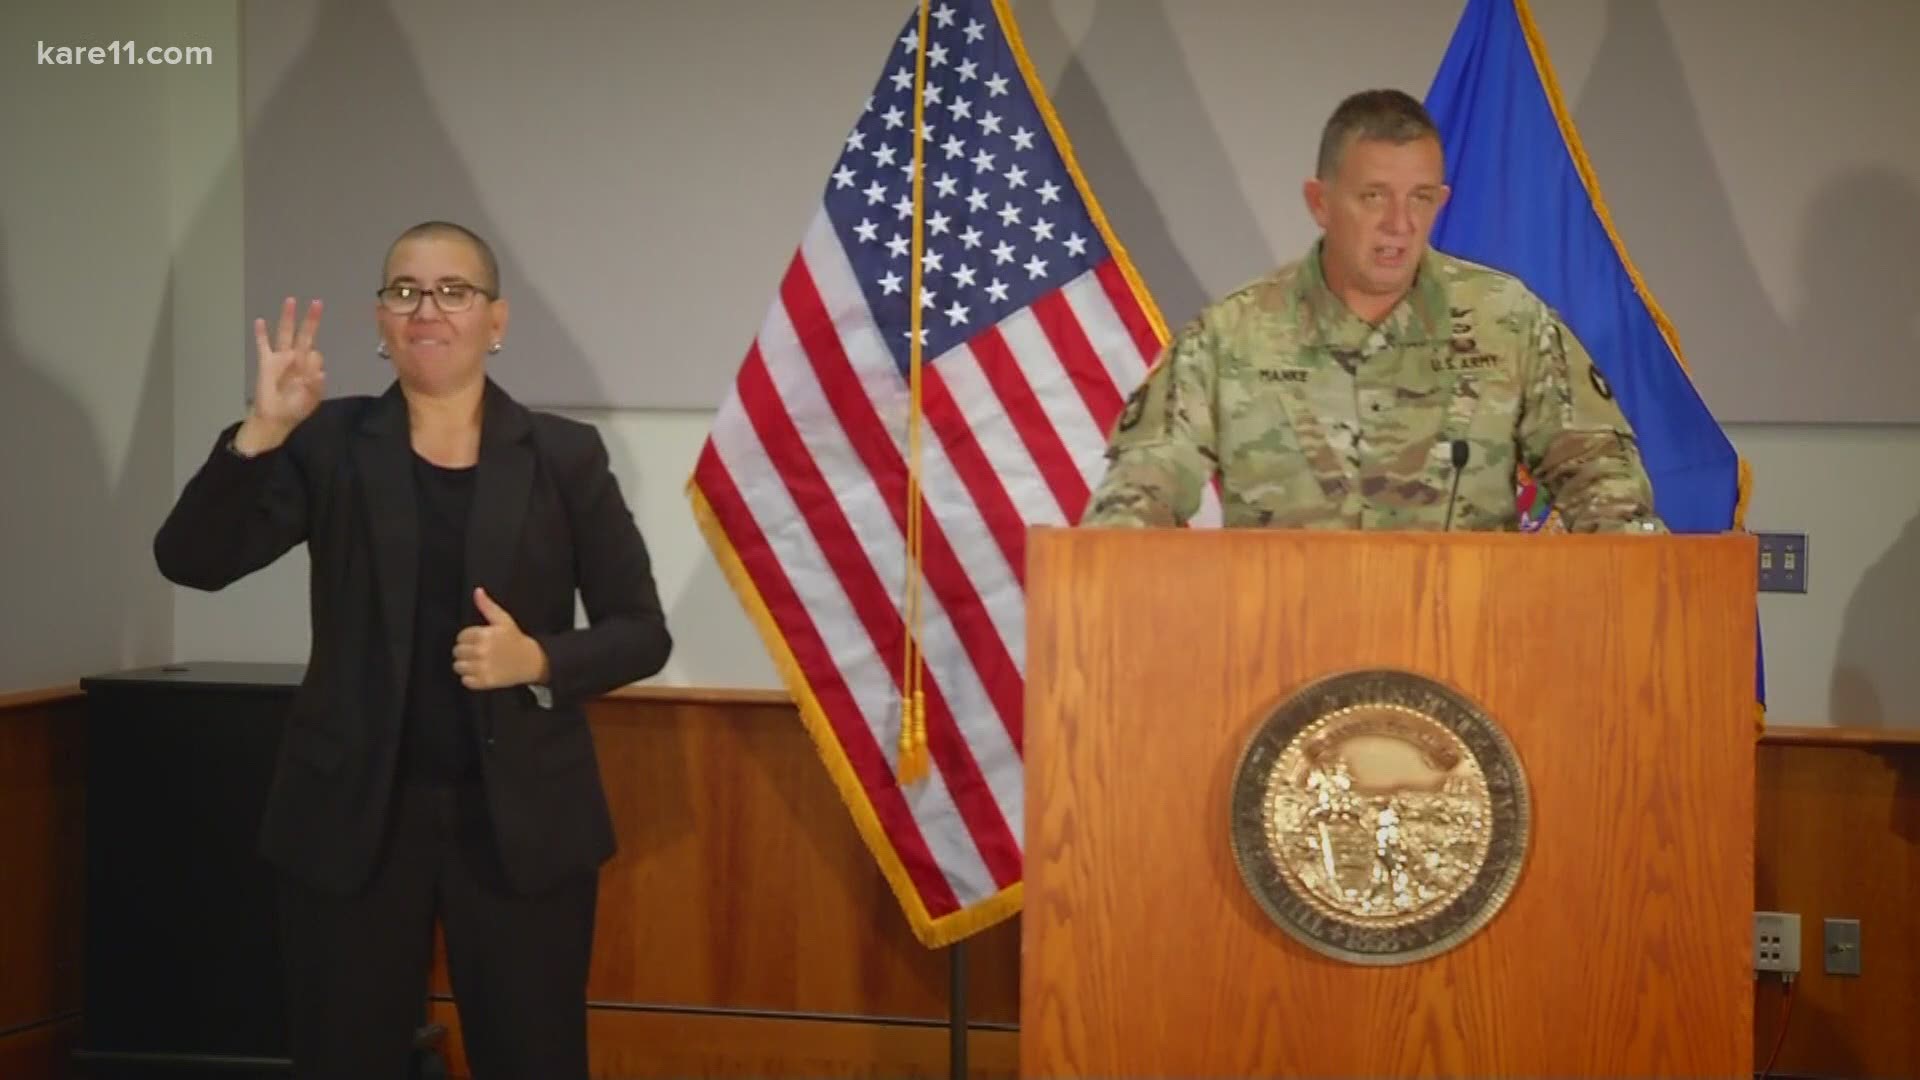 Gov. Tim Walz announced the appointment of Brigadier General Shawn Manke to serve as the Minnesota National Guard's next Adjutant General Wednesday.